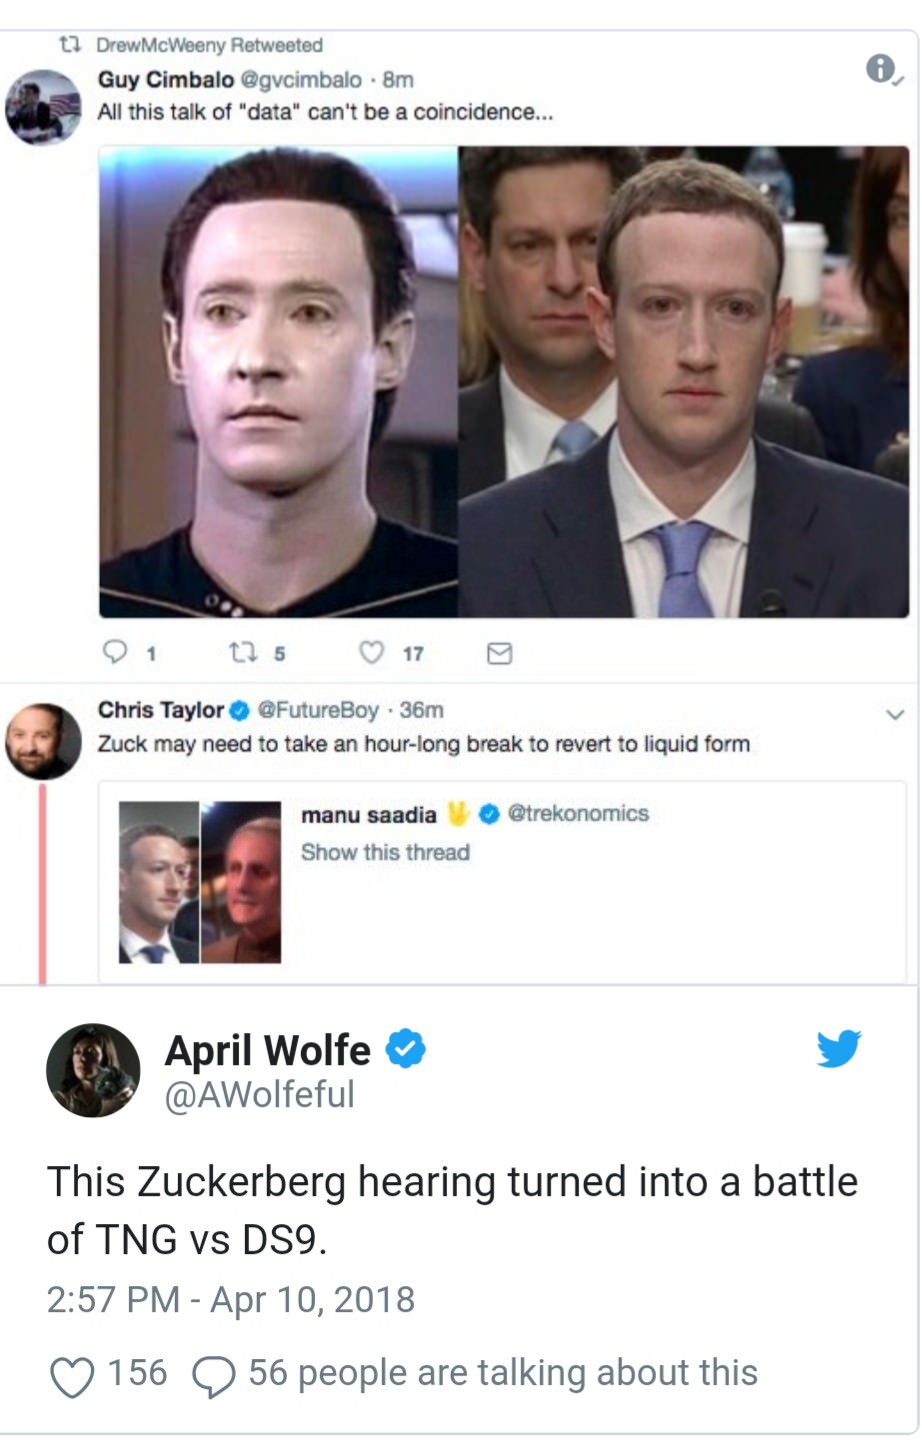 white collar worker - tl Drew McWeeny Retweeted Guy Cimbalo . 8m All this talk of "data" can't be a coincidence... 91 125 17 Chris Taylor 36m Zuck may need to take an hourlong break to revert to liquid form manu saadia Show this thread April Wolfe This Zu